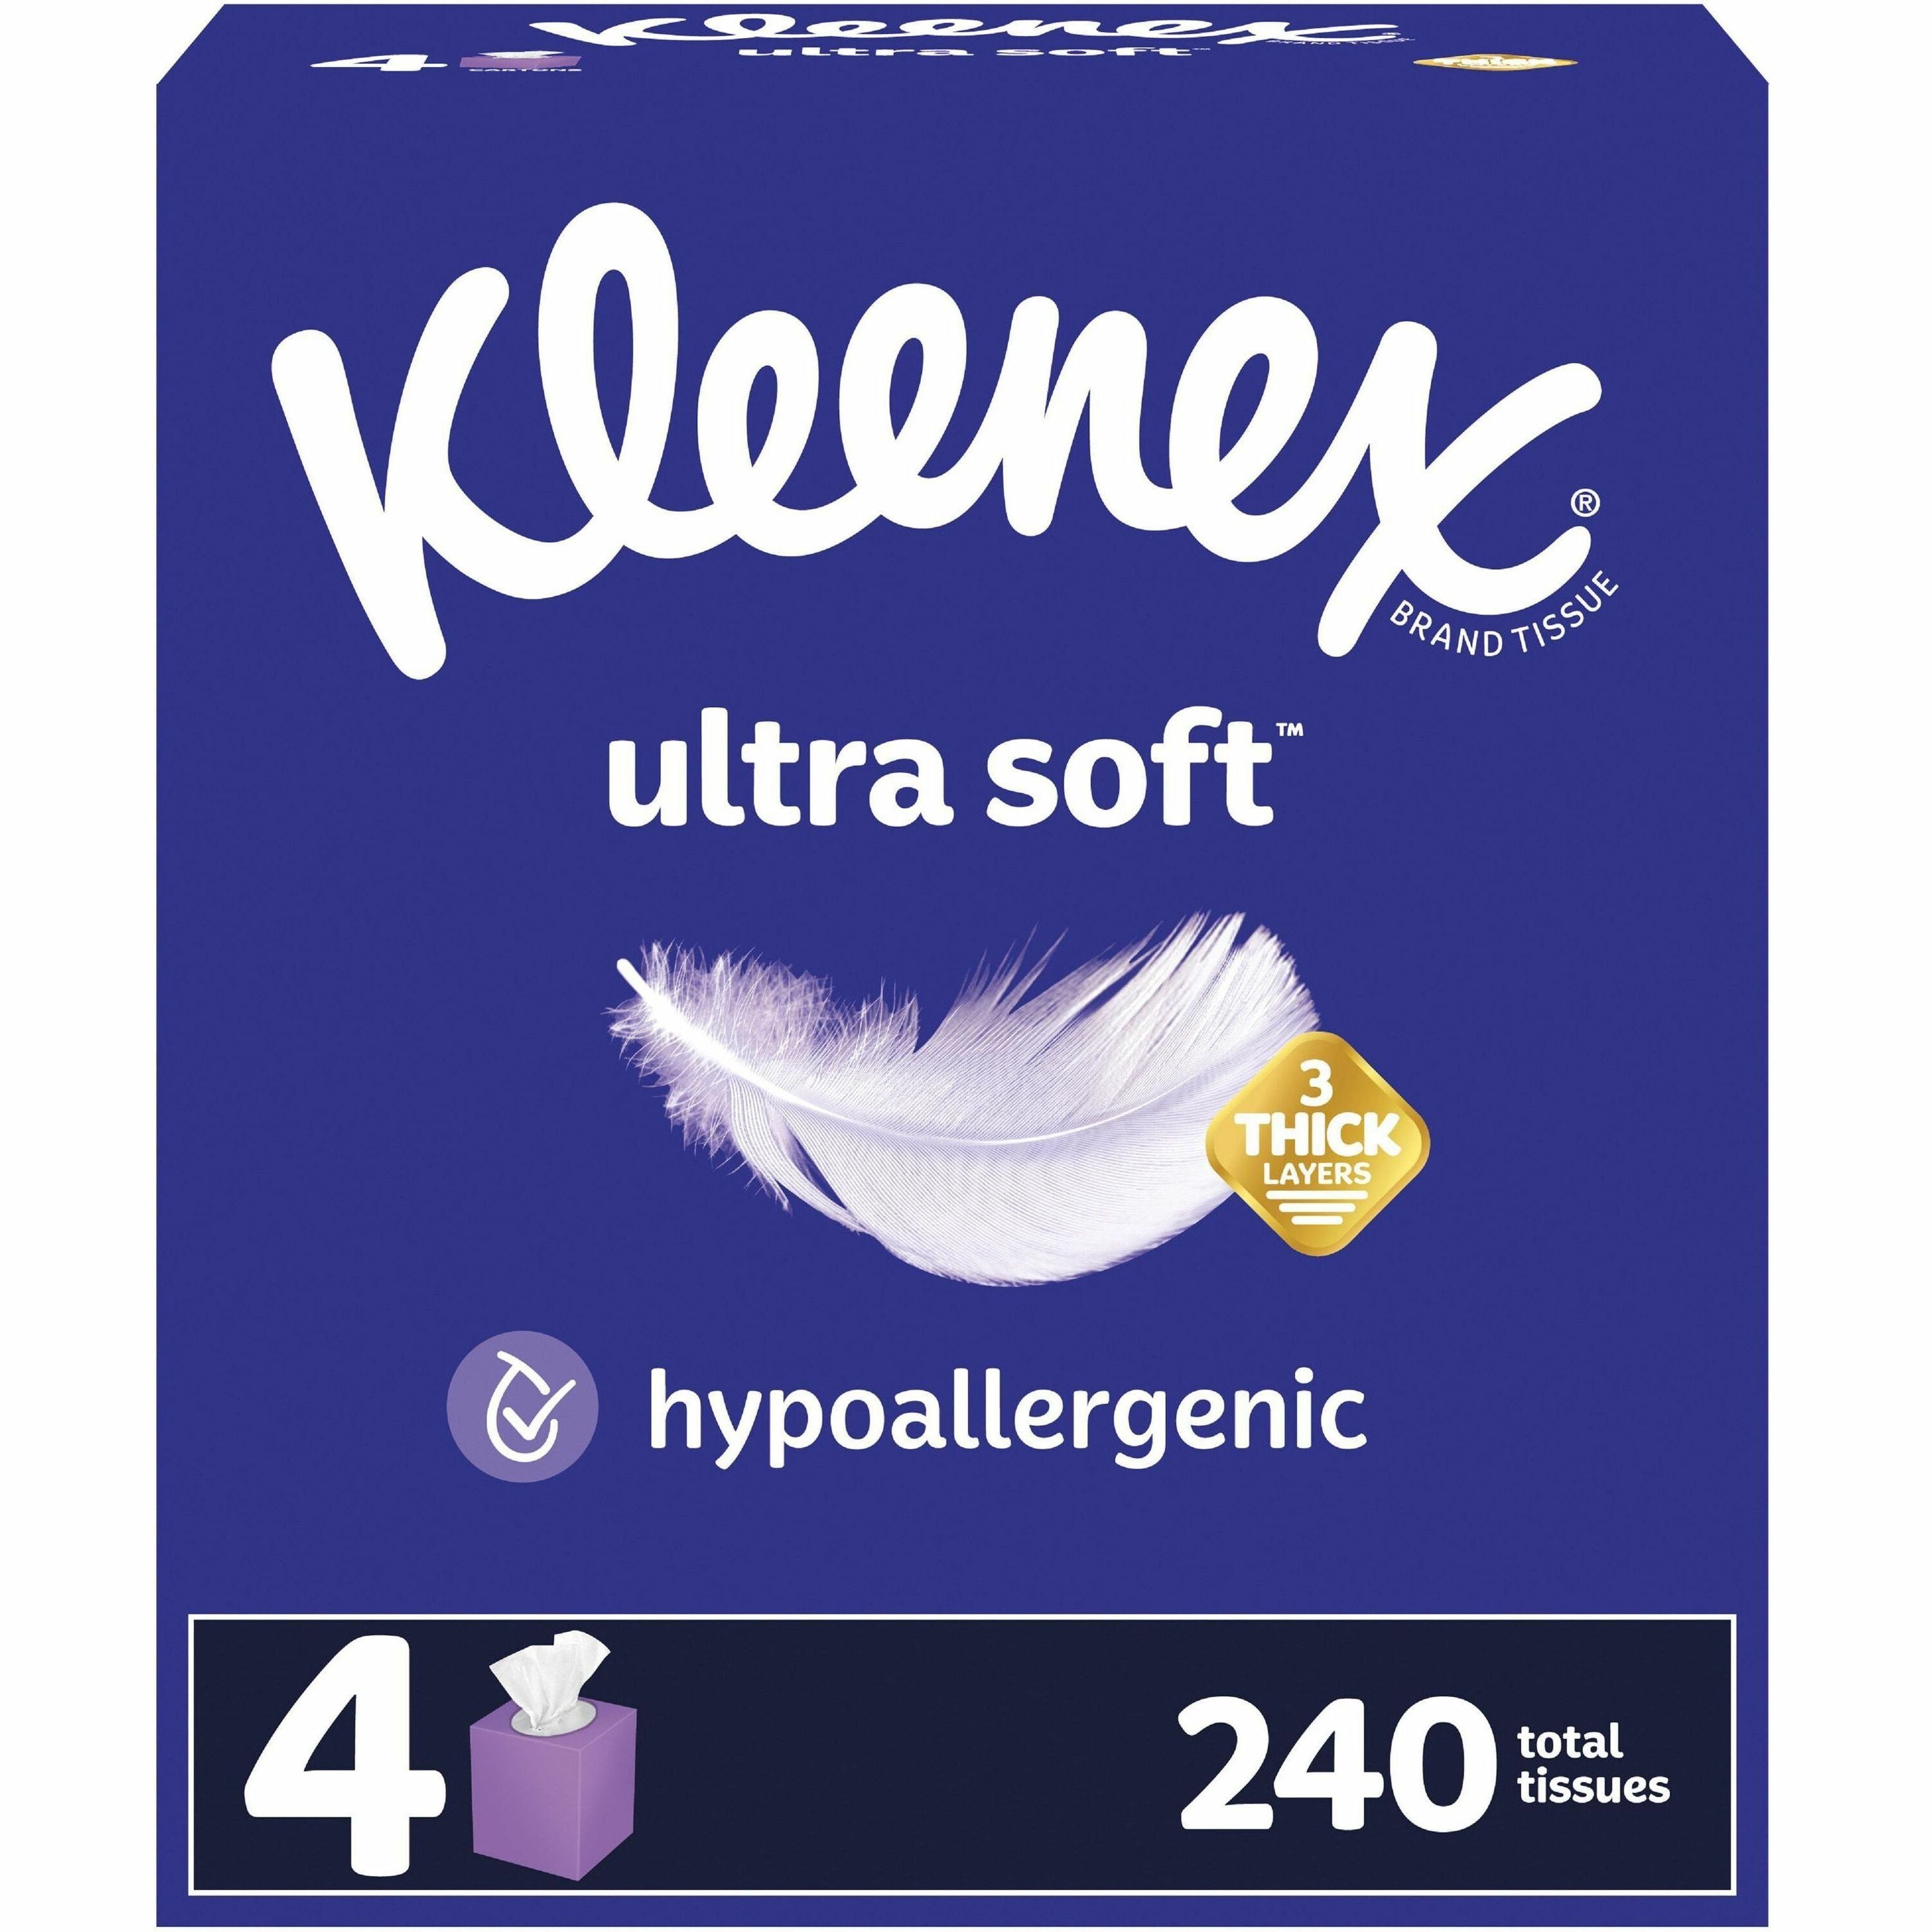 kleenex-ultra-soft-tissues-3-ply-white-soft-strong-fragrance-free-for-home-office-business-60-per-box-12-carton_kcc54308ct - 1